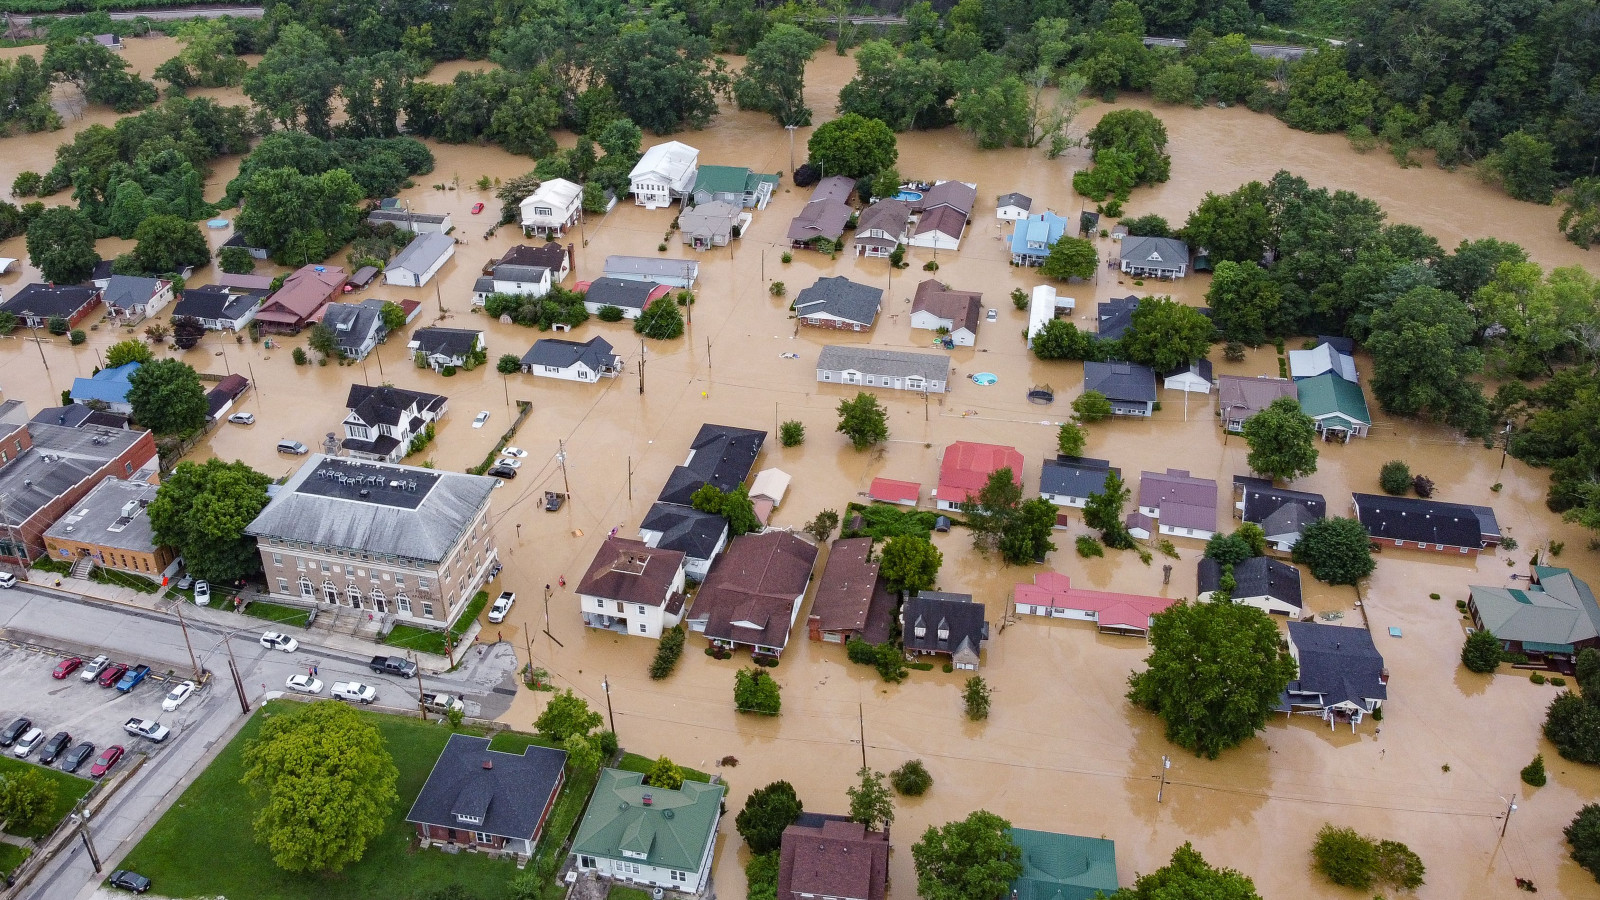 Aerial view of homes submerged under flood waters from the North Fork of the Kentucky River in Jackson, Kentucky, on July 28, 2022. - Flash flooding caused by torrential rains has killed at least eight people in eastern Kentucky and left some residents stranded on rooftops and in trees, the governor of the south-central US state said Thursday.